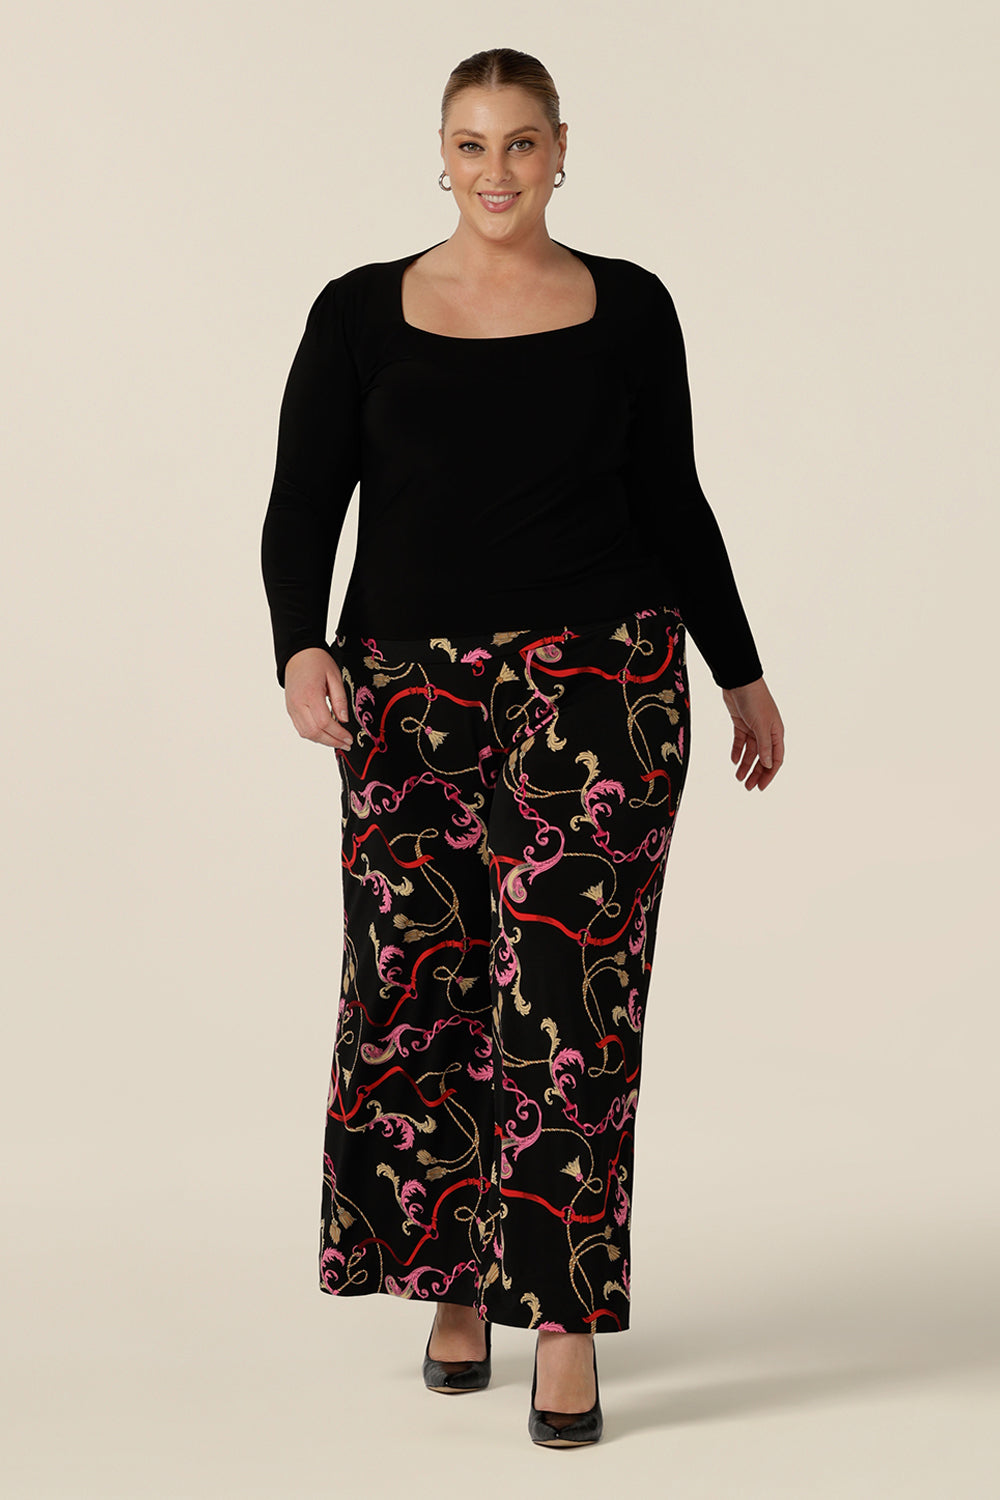 A fuller figure, size 18 woman wears printed wide leg pants with pockets and square neck, long sleeve black top as a work outfit. These pull-on, easy care pants are comfortable for your everyday workwear capsule wardrobe. Shop these Australian-made wide leg trousers online in sizes 8 to 24, petite to plus sizes.